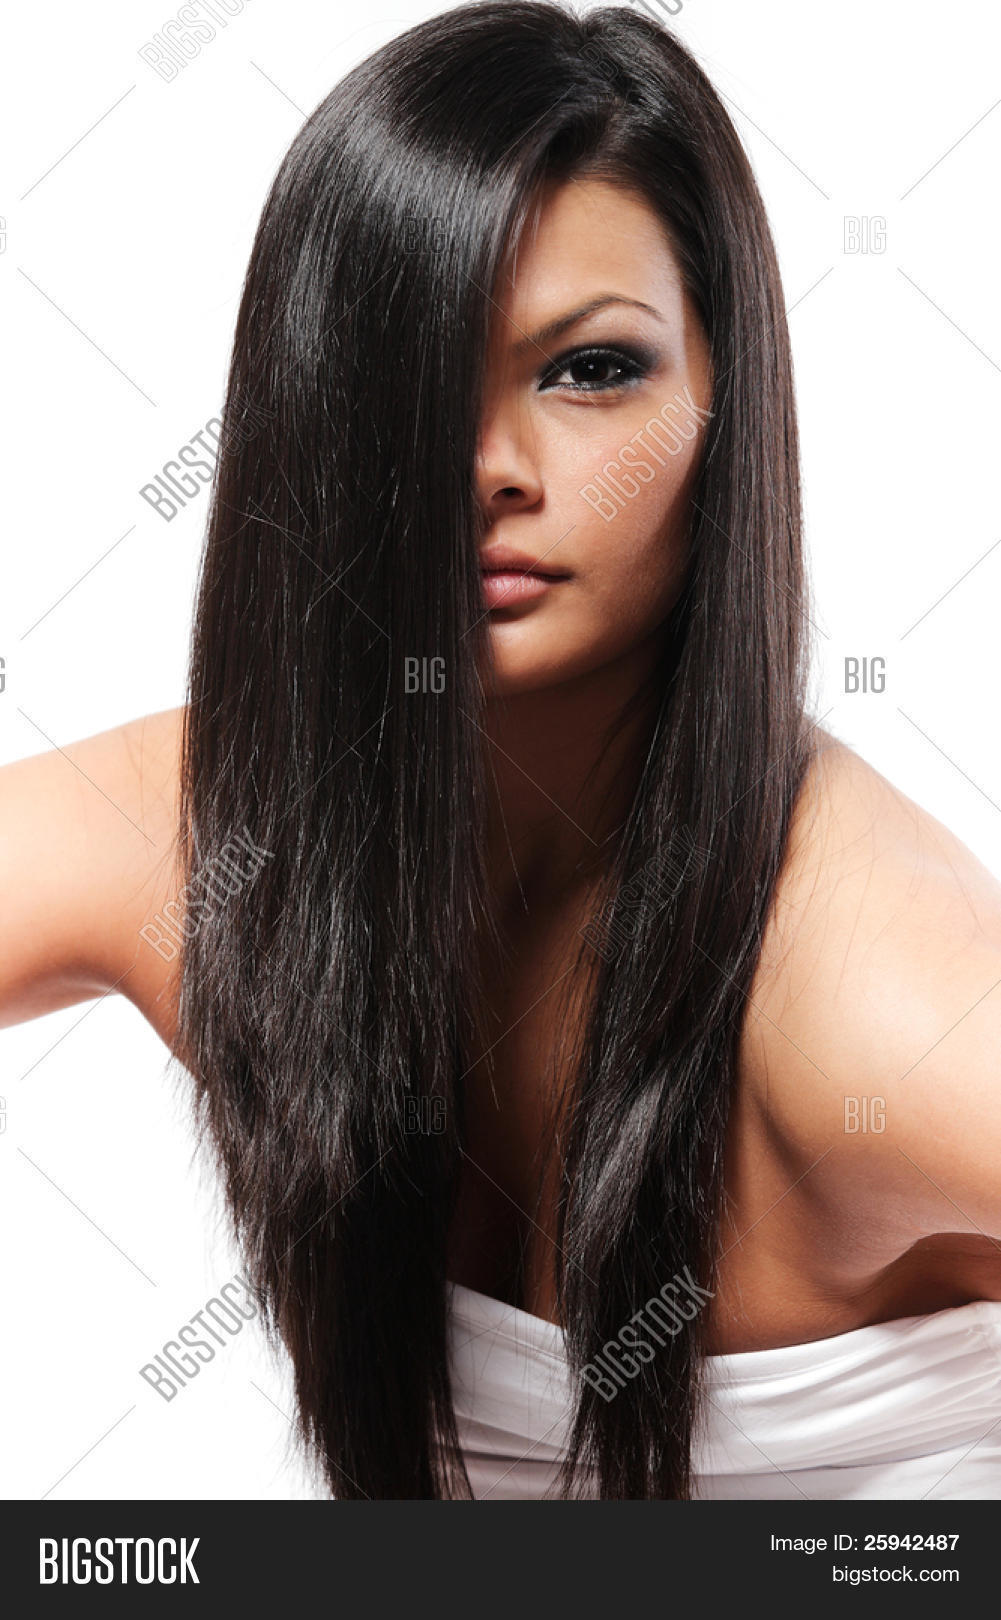 dexter taganas recommends Girls With Long Black Hair